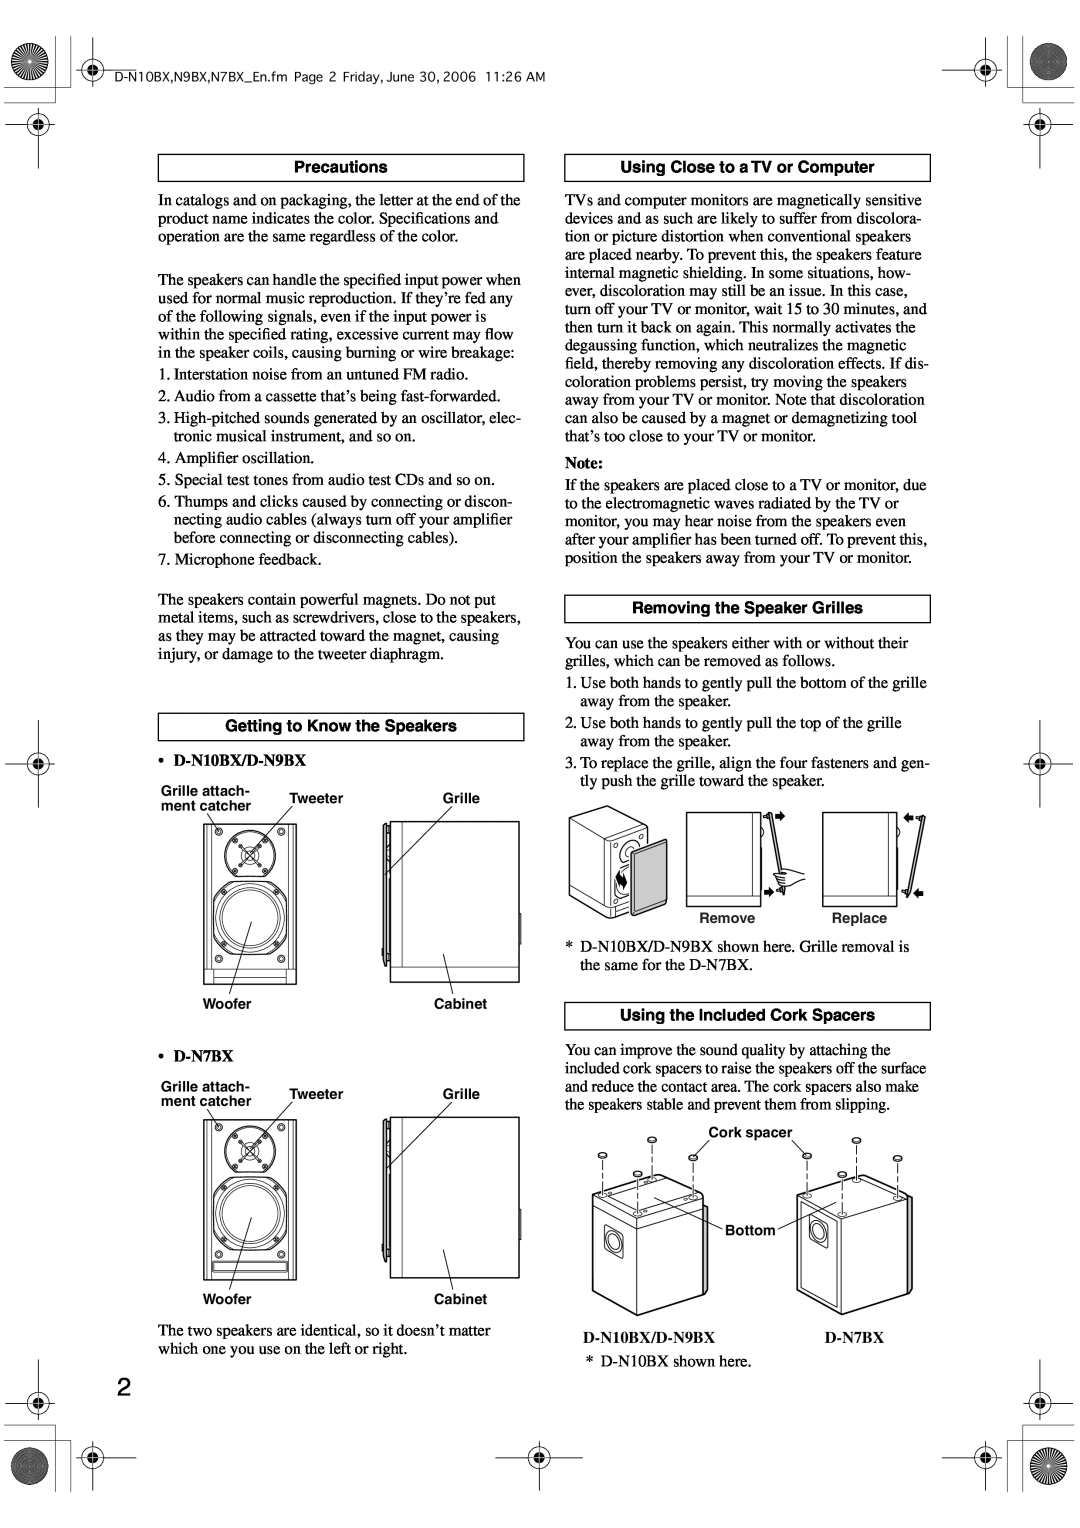 Onkyo Precautions, Getting to Know the Speakers, D-N10BX/D-N9BX, D-N7BX, Using Close to a TV or Computer 